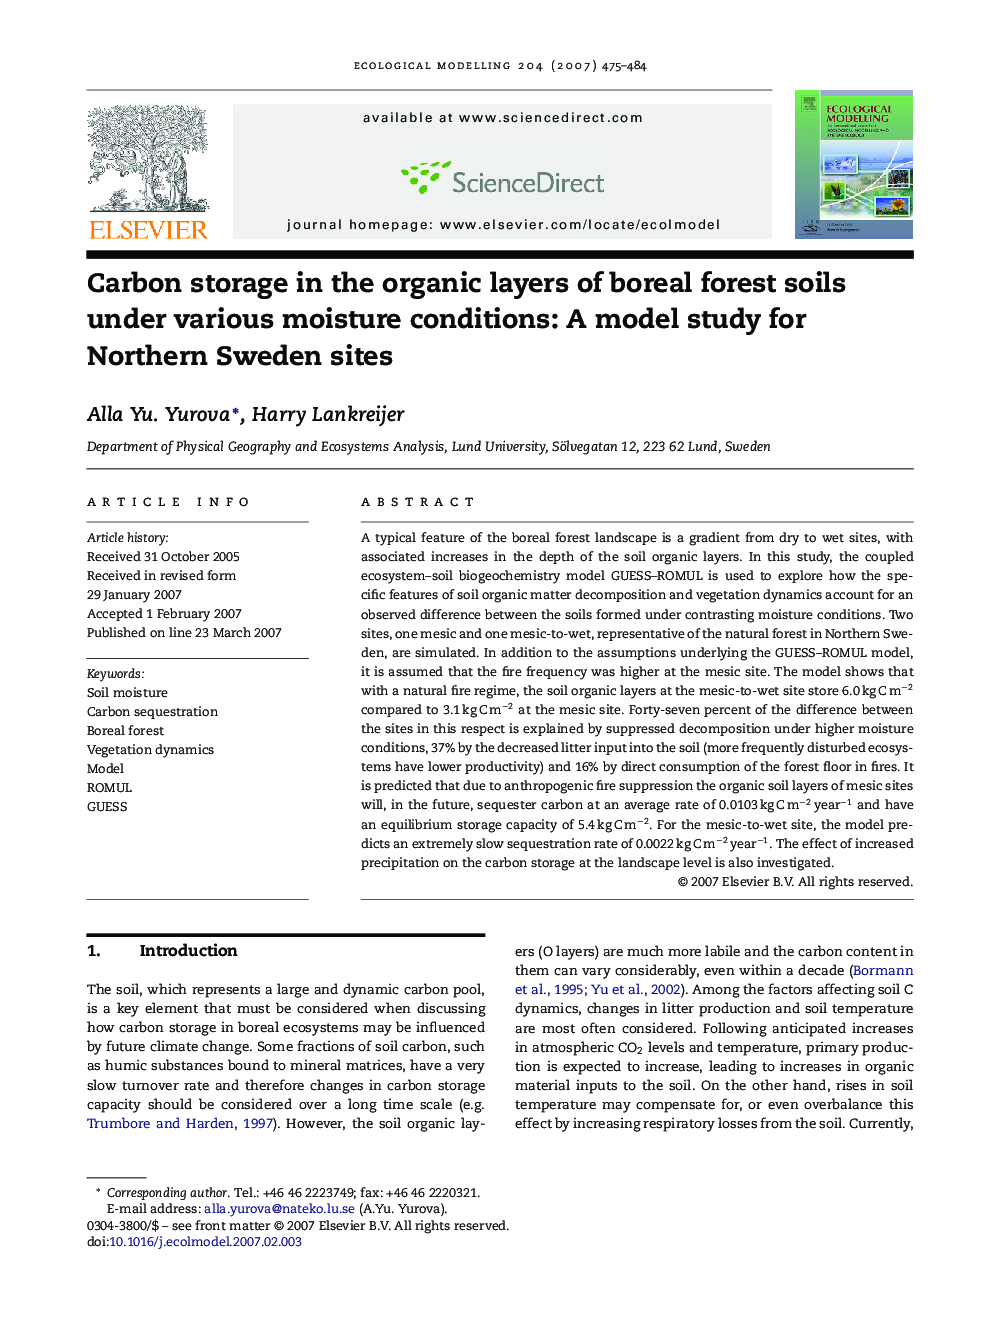 Carbon storage in the organic layers of boreal forest soils under various moisture conditions: A model study for Northern Sweden sites